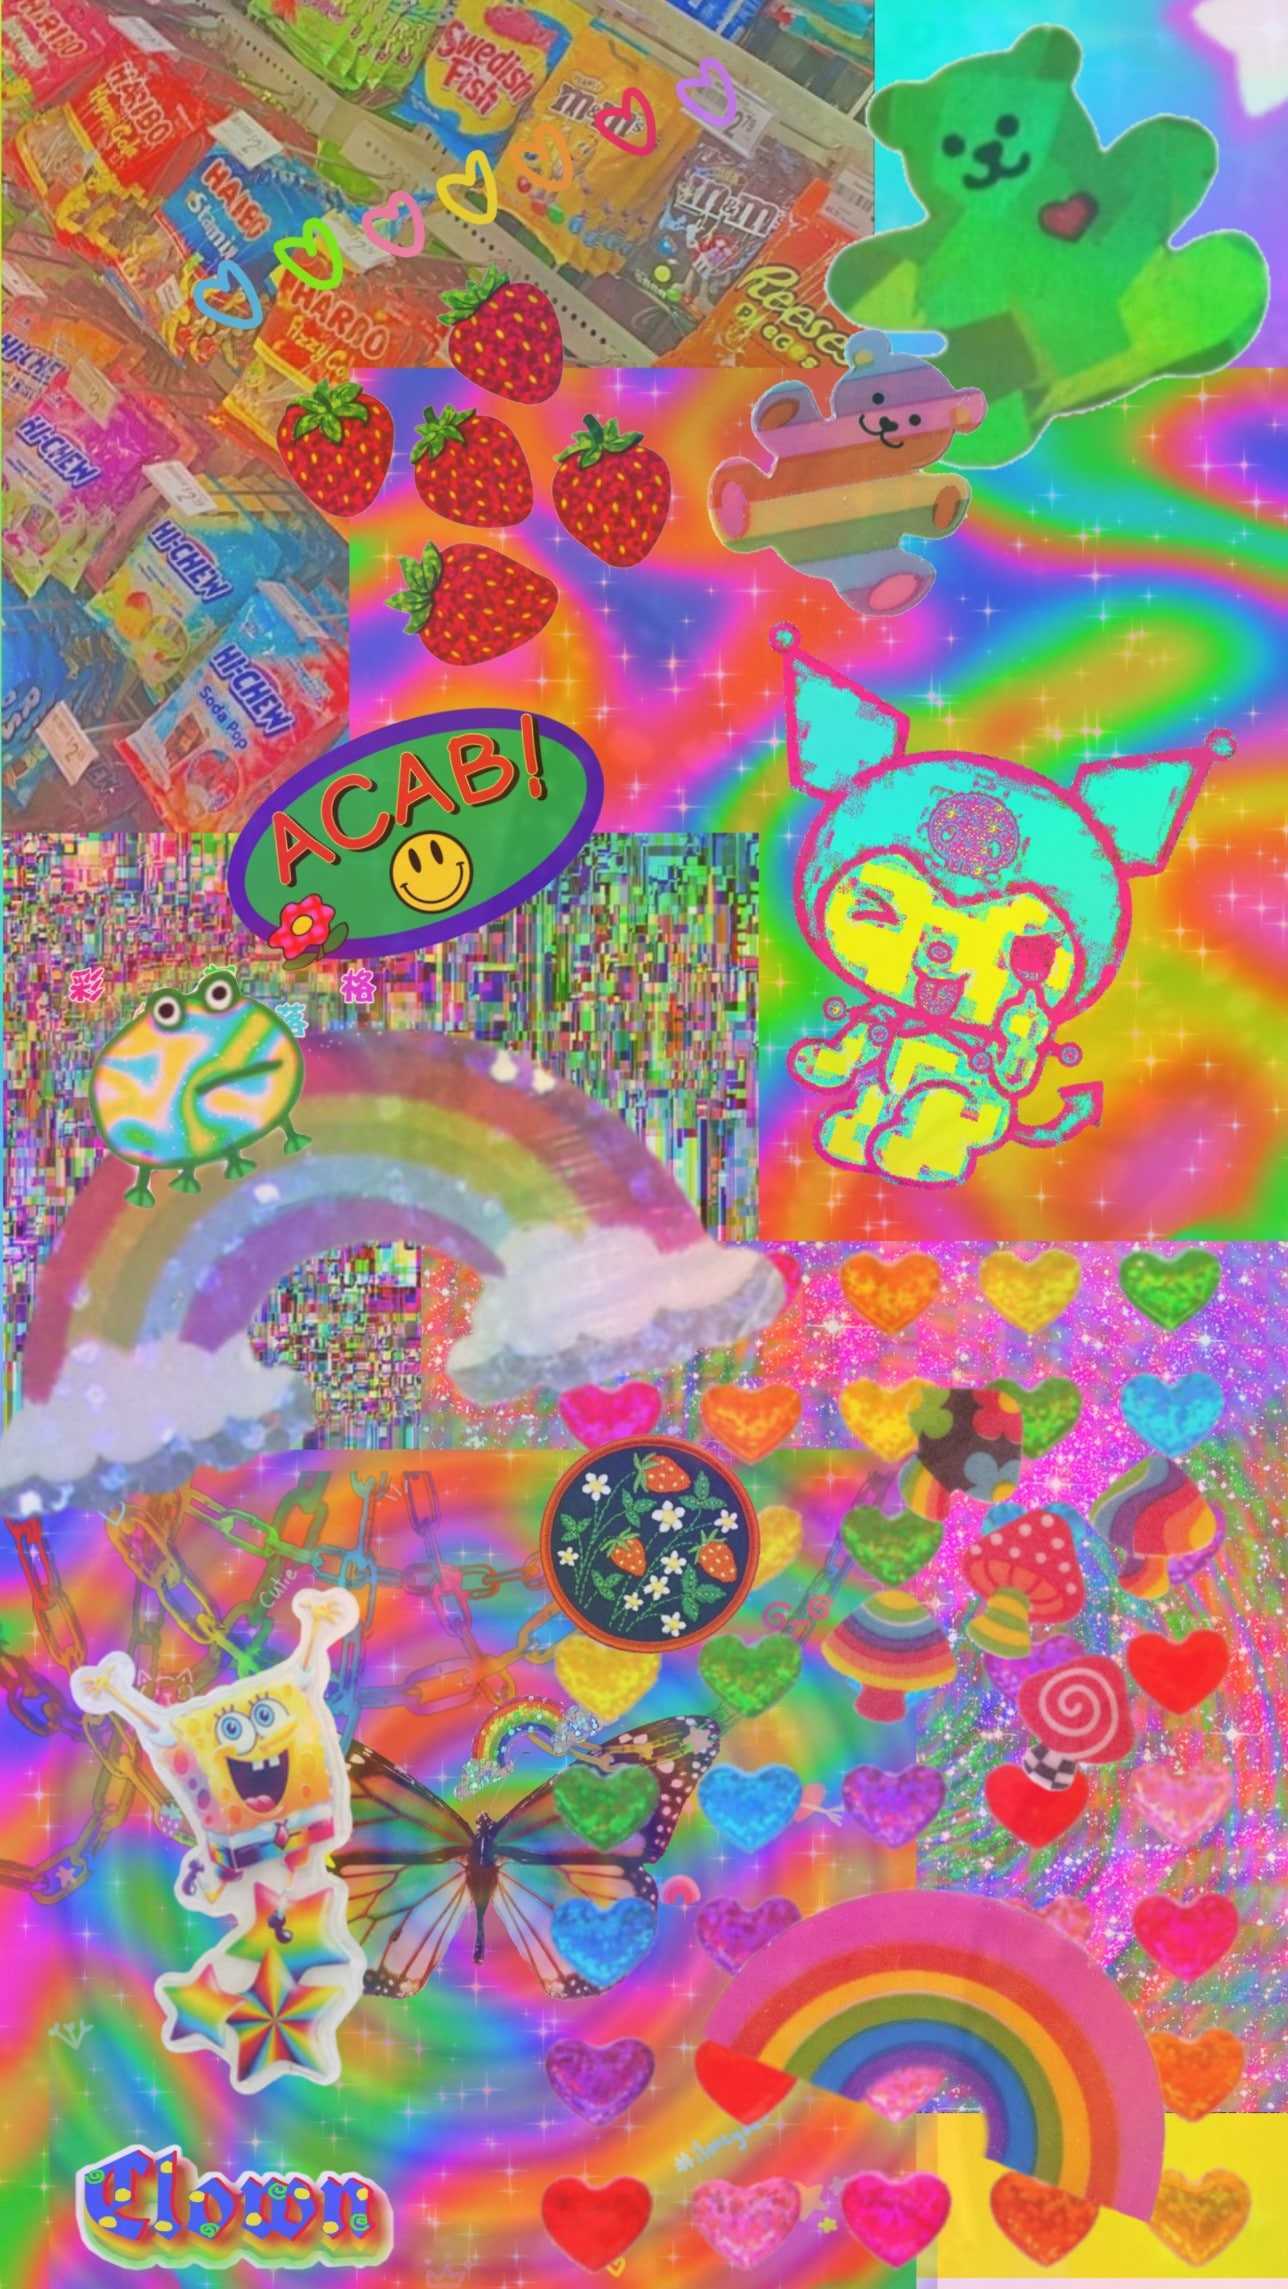 A colorful collage of Lisa Frank stickers and images. - Kidcore